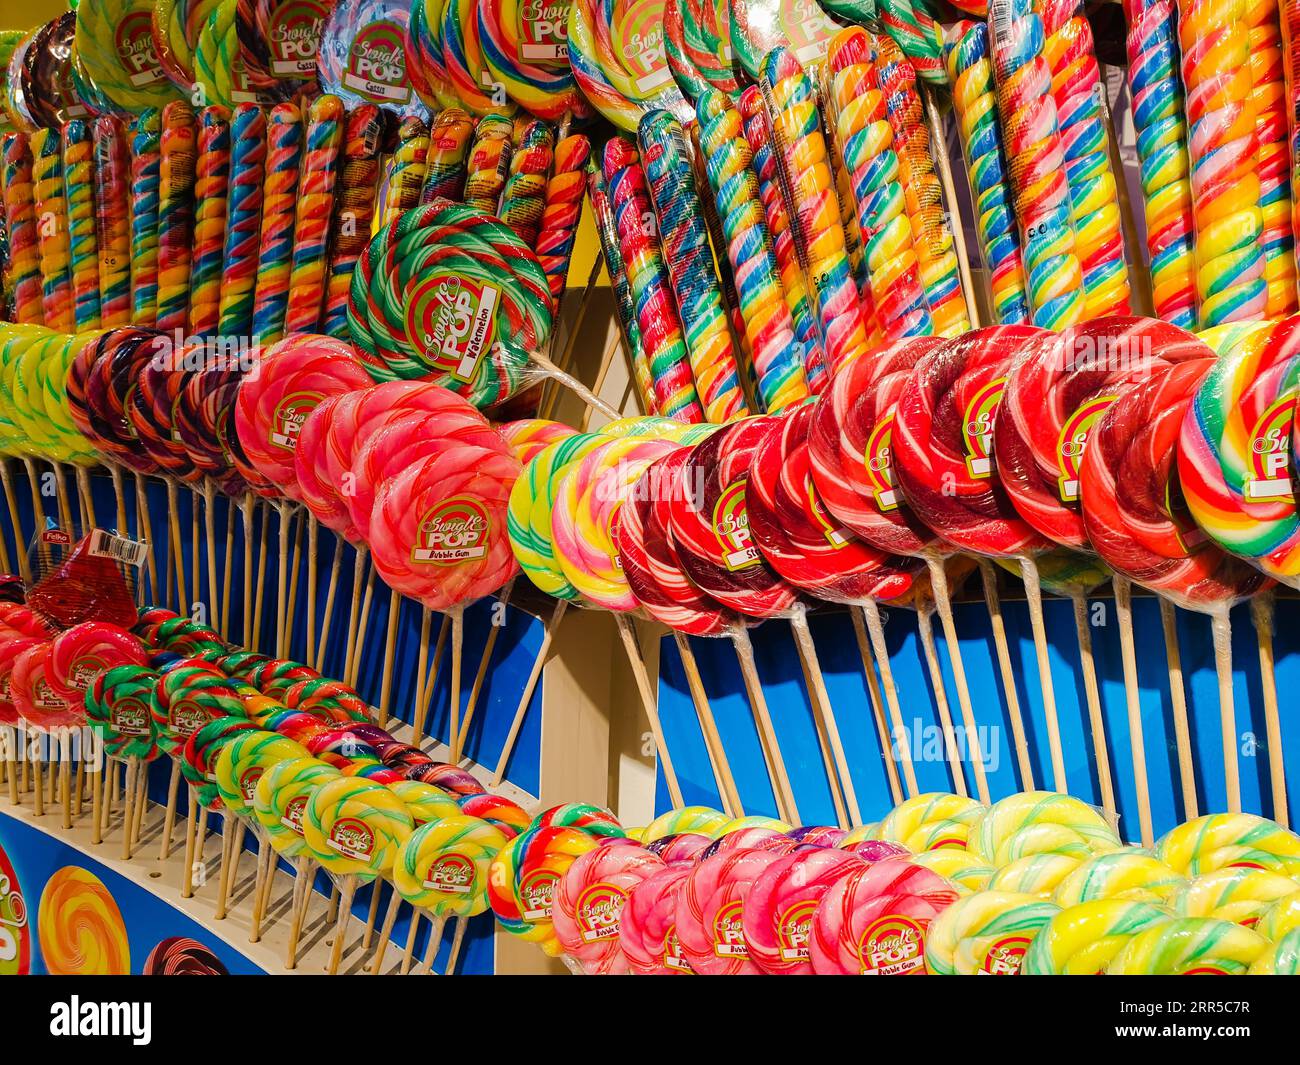 A row of colorful lollipops Stock Photo